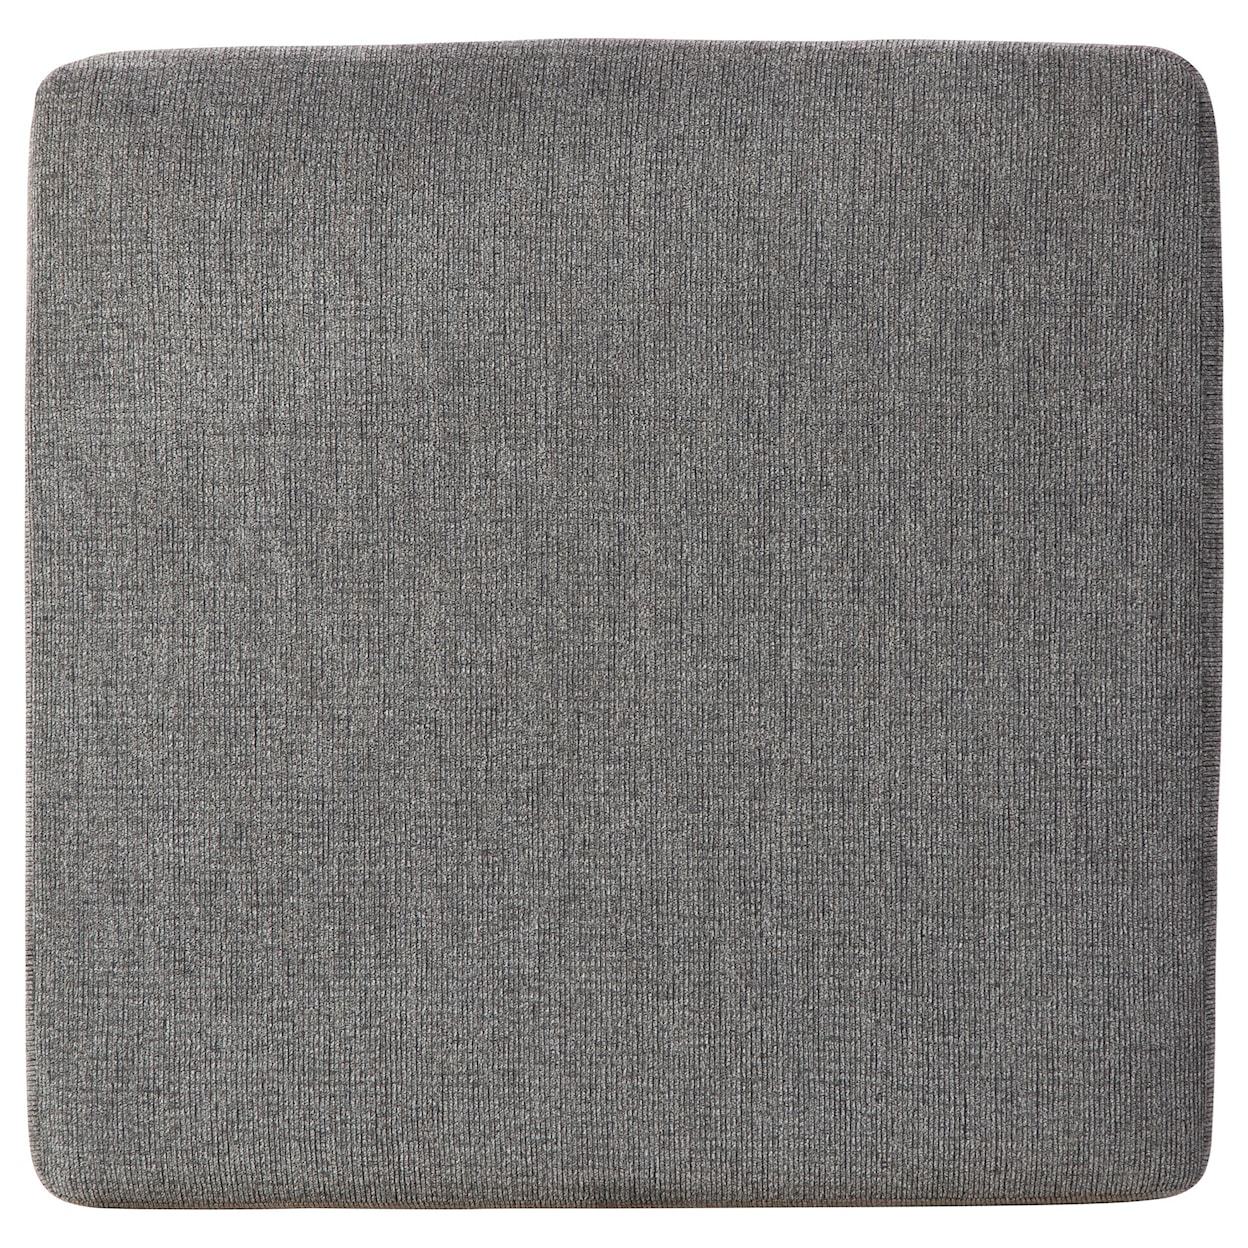 Benchcraft by Ashley Dalhart Oversized Accent Ottoman